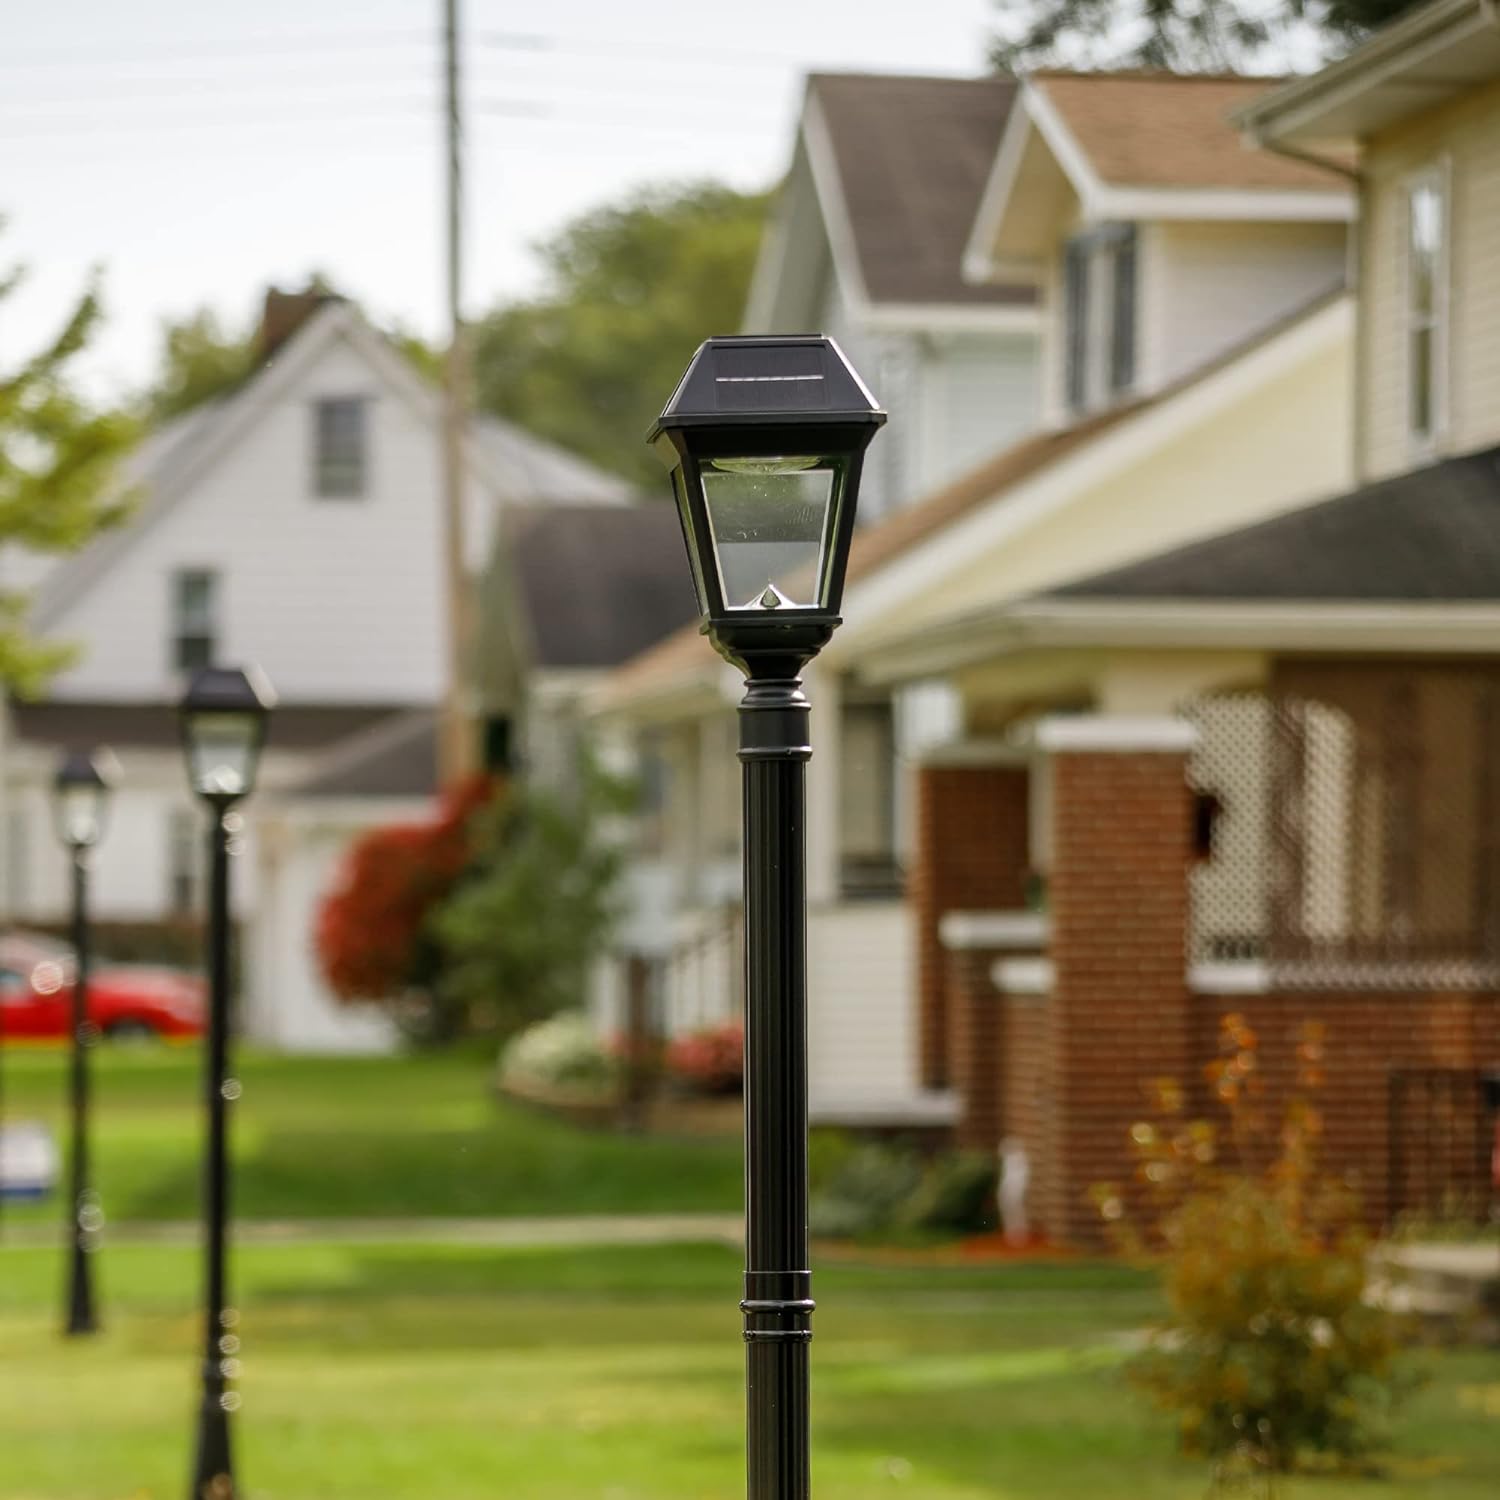 Imperial III Solar Post Light, Black Aluminum and Glass, Outdoor Lamp, 300 Lumen Dual Color Temperature, 3-inch Fitter for Lamp Posts or Pier Mount (Sold Separately) 97K012